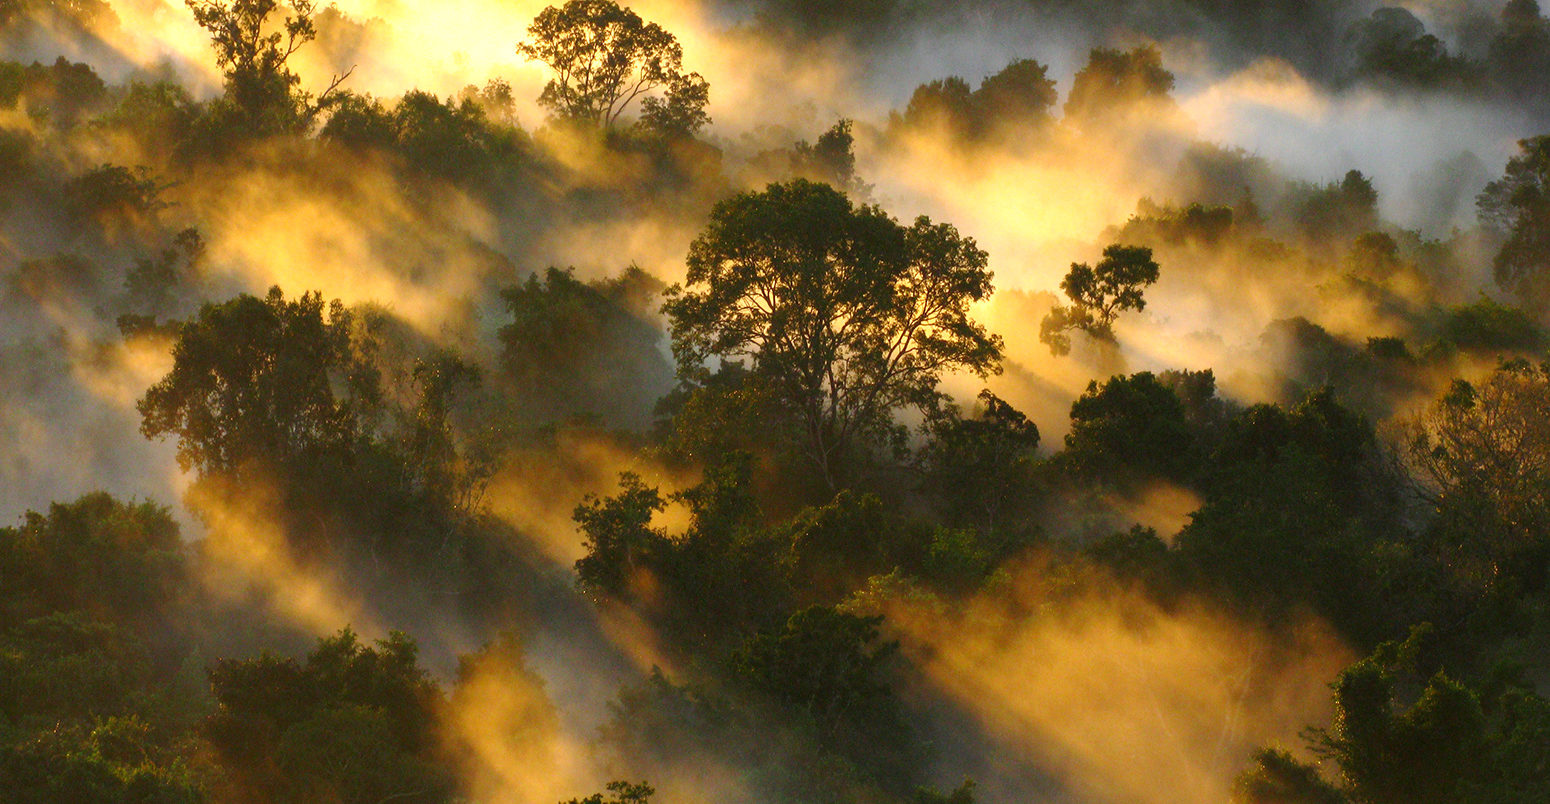 Amazon forest canopy at dawn, Brazil. Credit: Dr Peter Vander Sleen.